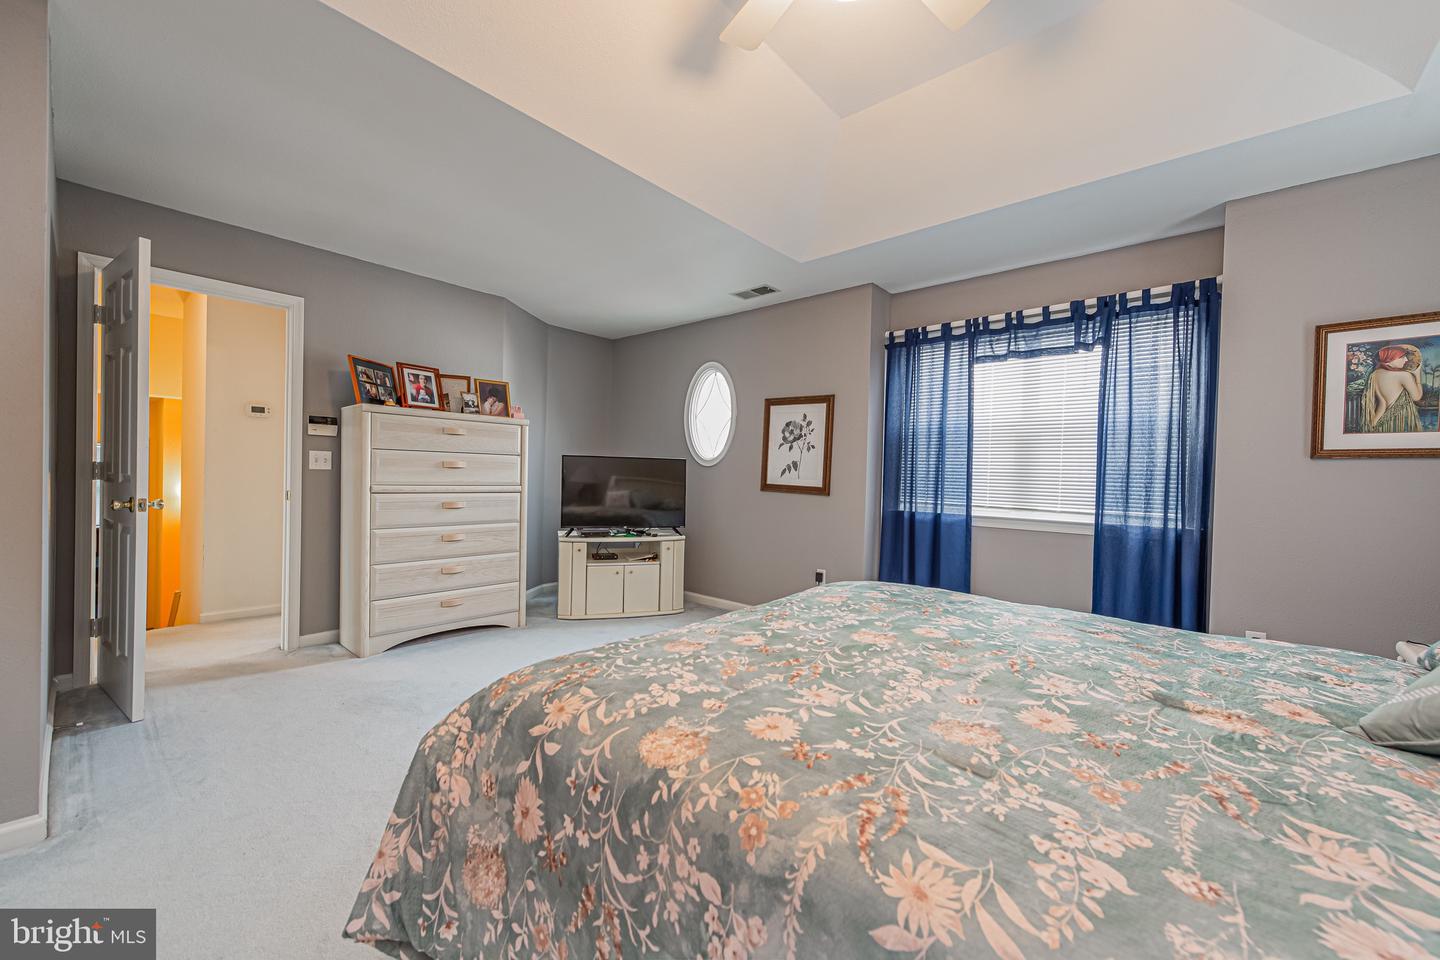 34055 Monterray Avenue Unit 173, Frankford, Delaware, 19945, United States, 3 Bedrooms Bedrooms, ,3 BathroomsBathrooms,Residential,For Sale,34055 Monterray Avenue Unit 173,1460197